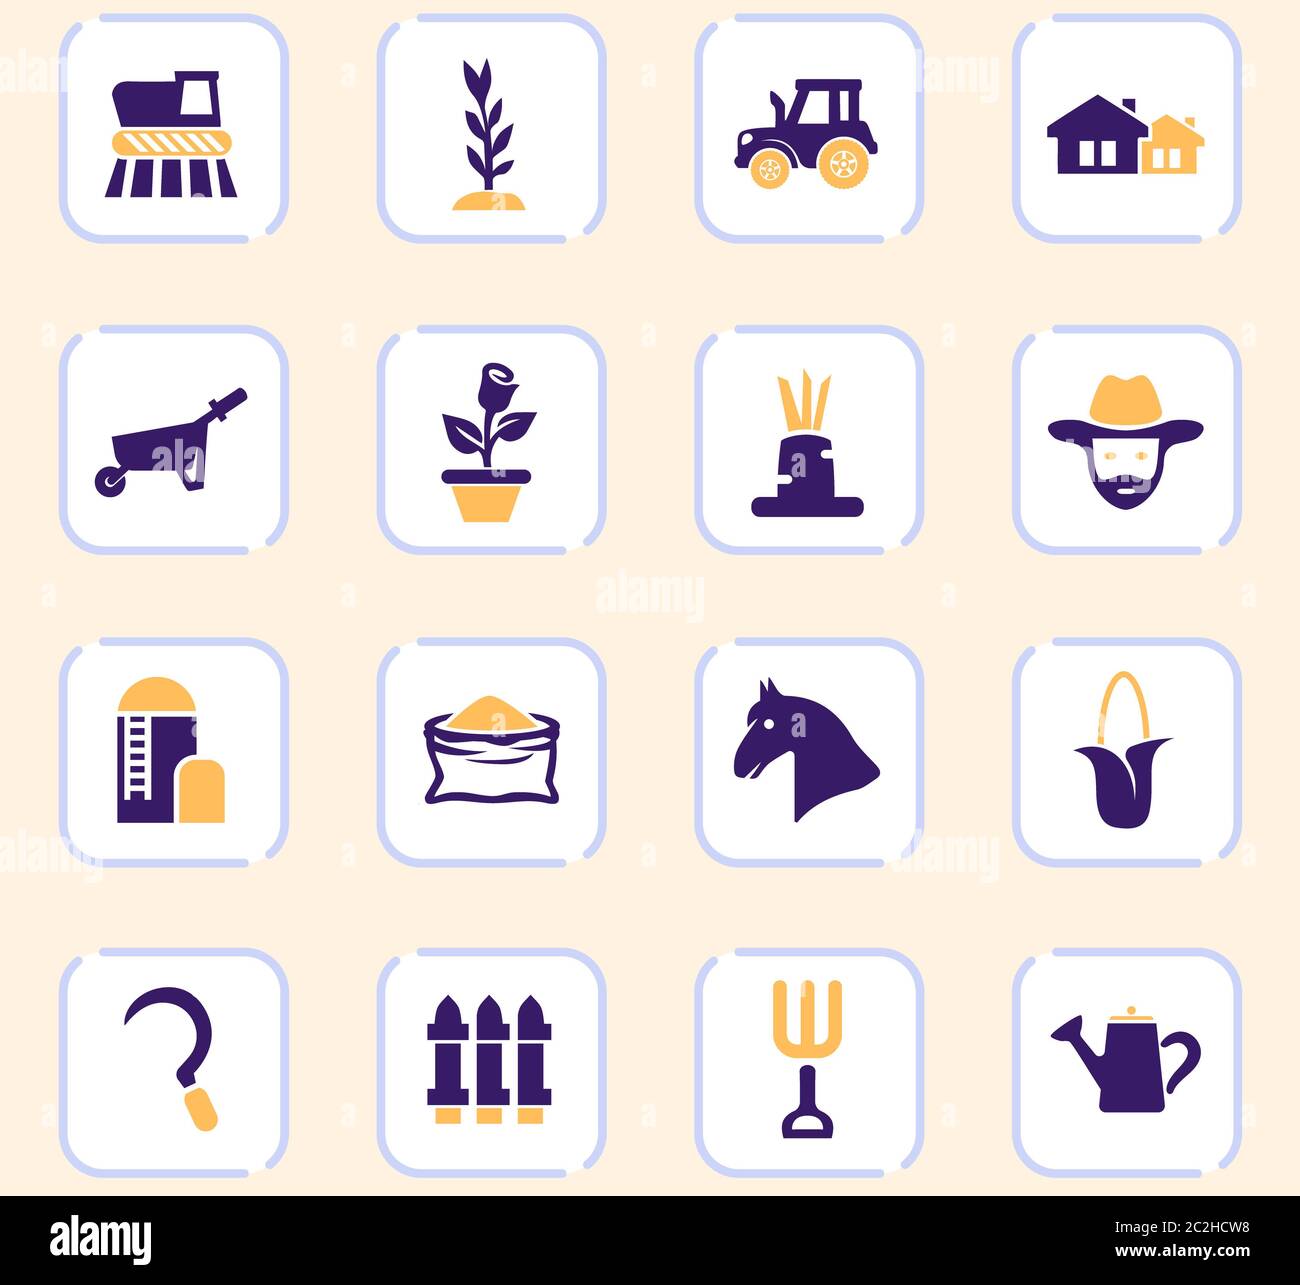 Agricultural icons set for web sites and user interface Stock Photo